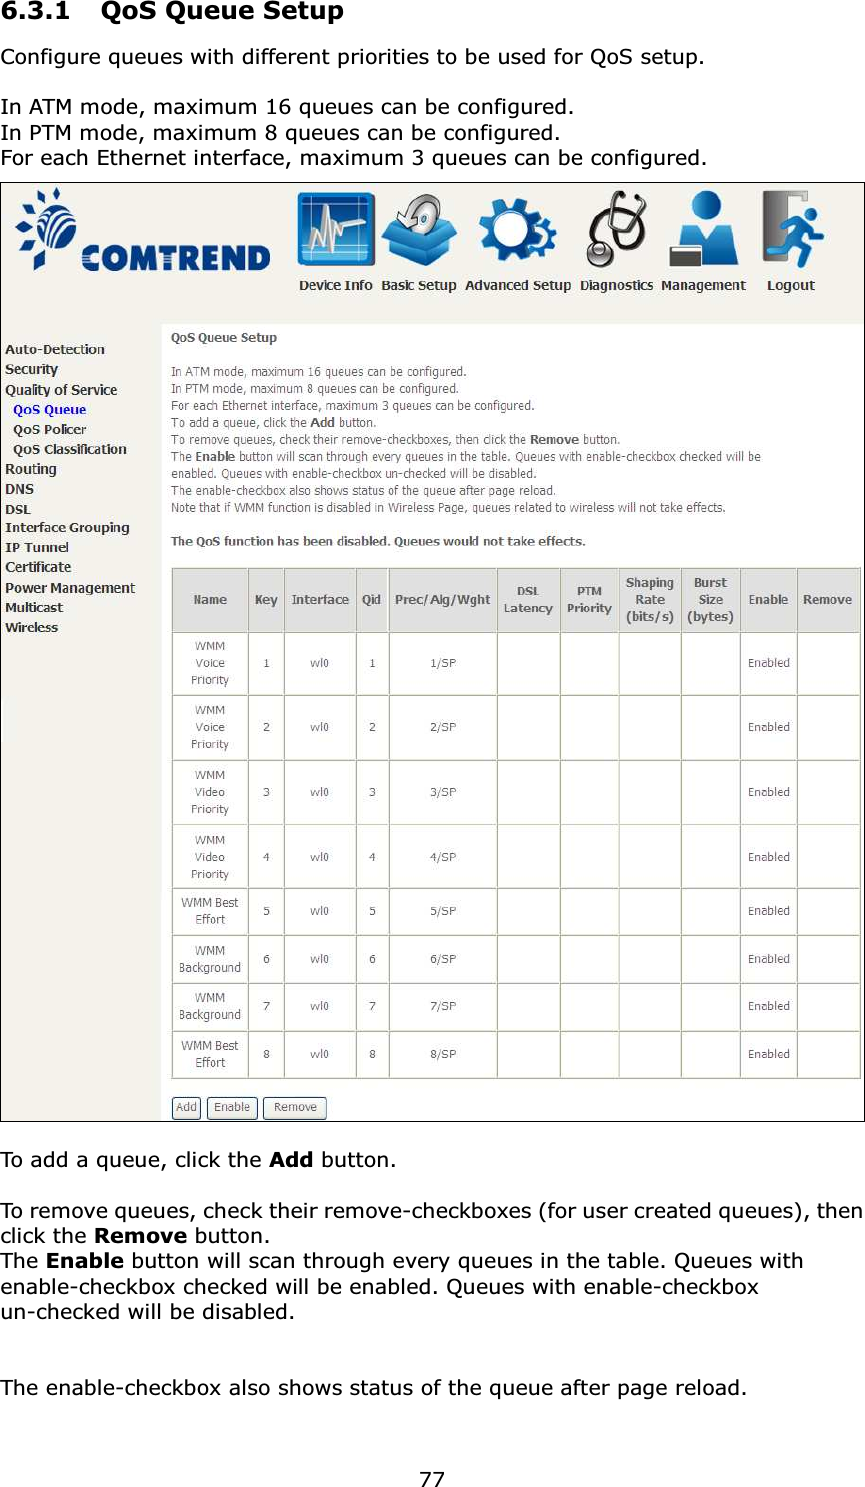  776.3.1  QoS Queue Setup Configure queues with different priorities to be used for QoS setup.  In ATM mode, maximum 16 queues can be configured. In PTM mode, maximum 8 queues can be configured. For each Ethernet interface, maximum 3 queues can be configured.   To add a queue, click the Add button.  To remove queues, check their remove-checkboxes (for user created queues), then click the Remove button. The Enable button will scan through every queues in the table. Queues with enable-checkbox checked will be enabled. Queues with enable-checkbox un-checked will be disabled.   The enable-checkbox also shows status of the queue after page reload.  